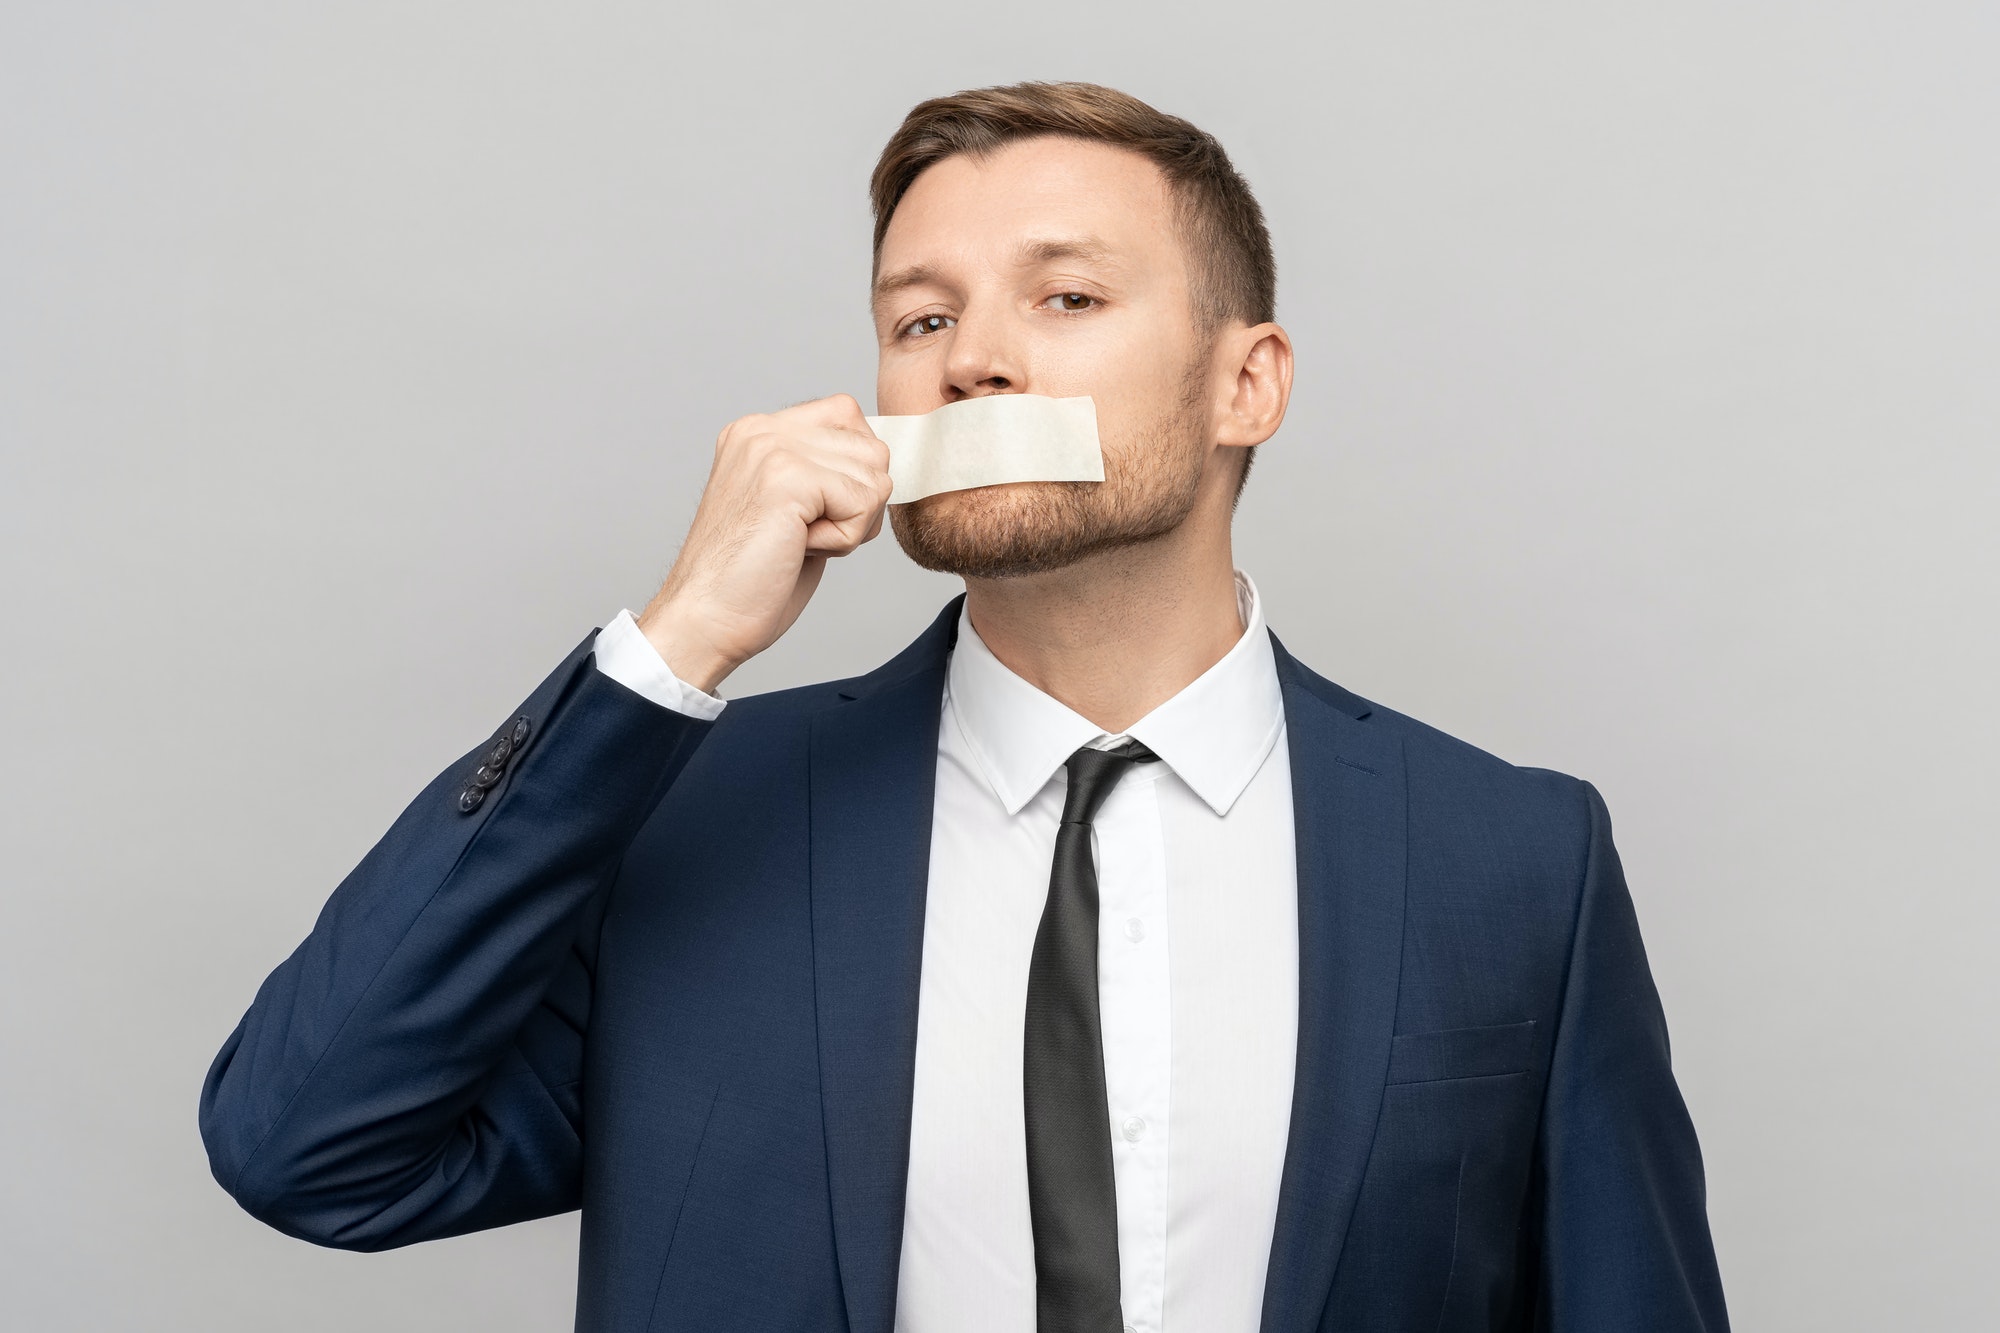 Man office worker with tape on his mouth. Prohibitions of expression opinion, freedom of speech